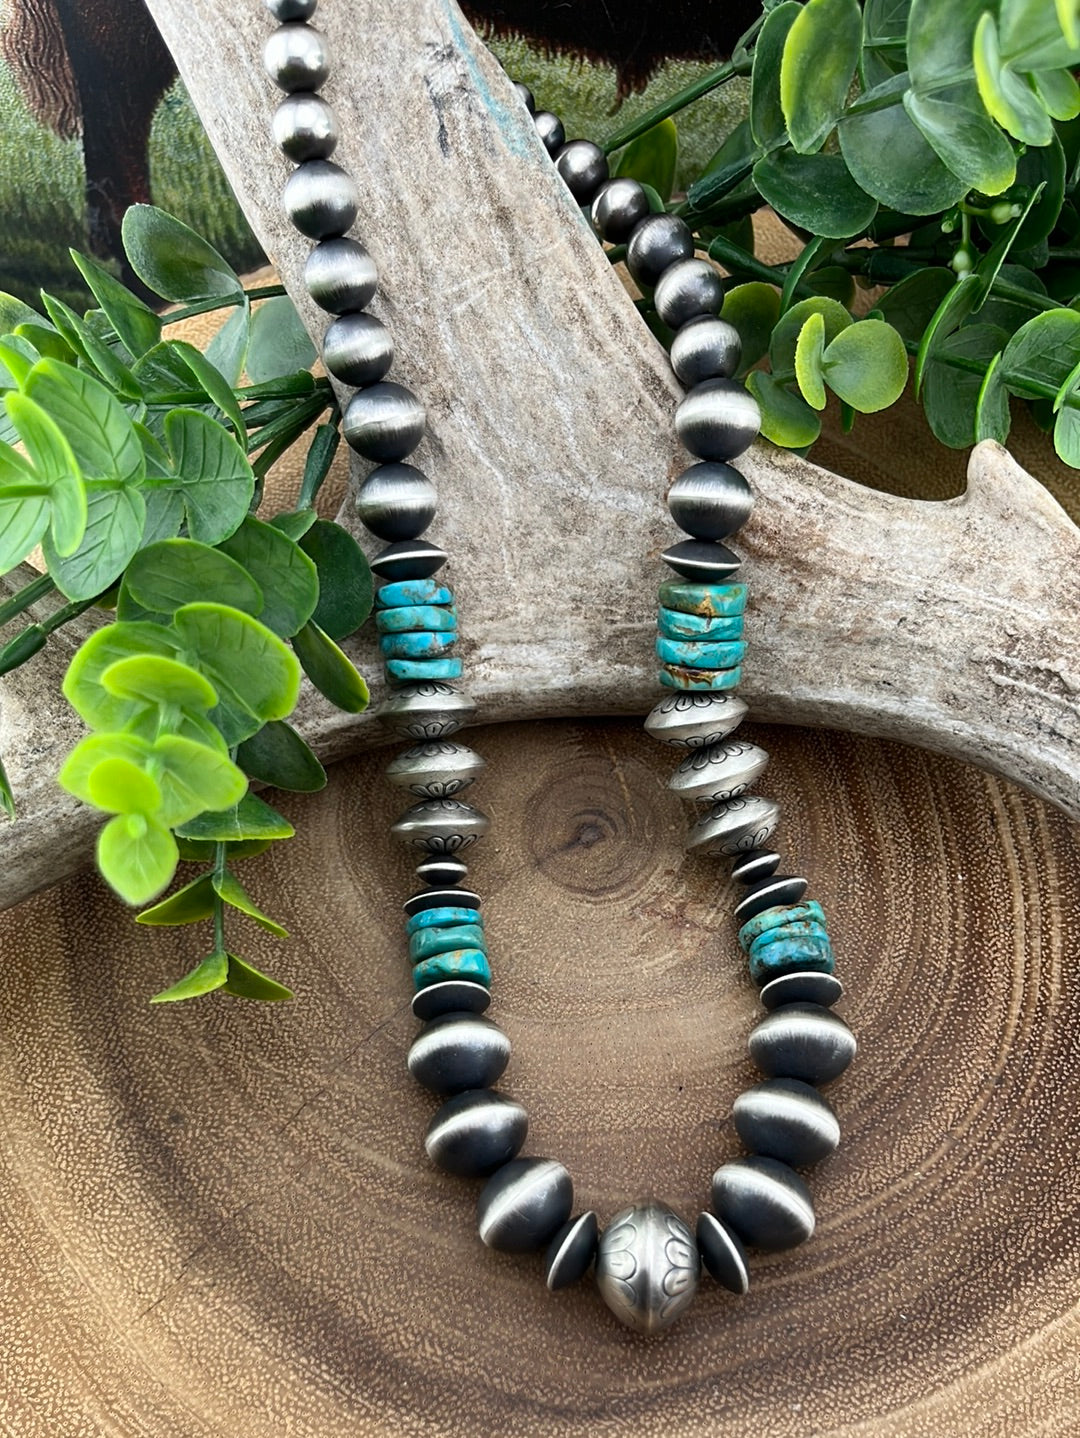 Caroline Sterling Navajo & Stamped Bead Necklace With Turquoise Accents - 18"